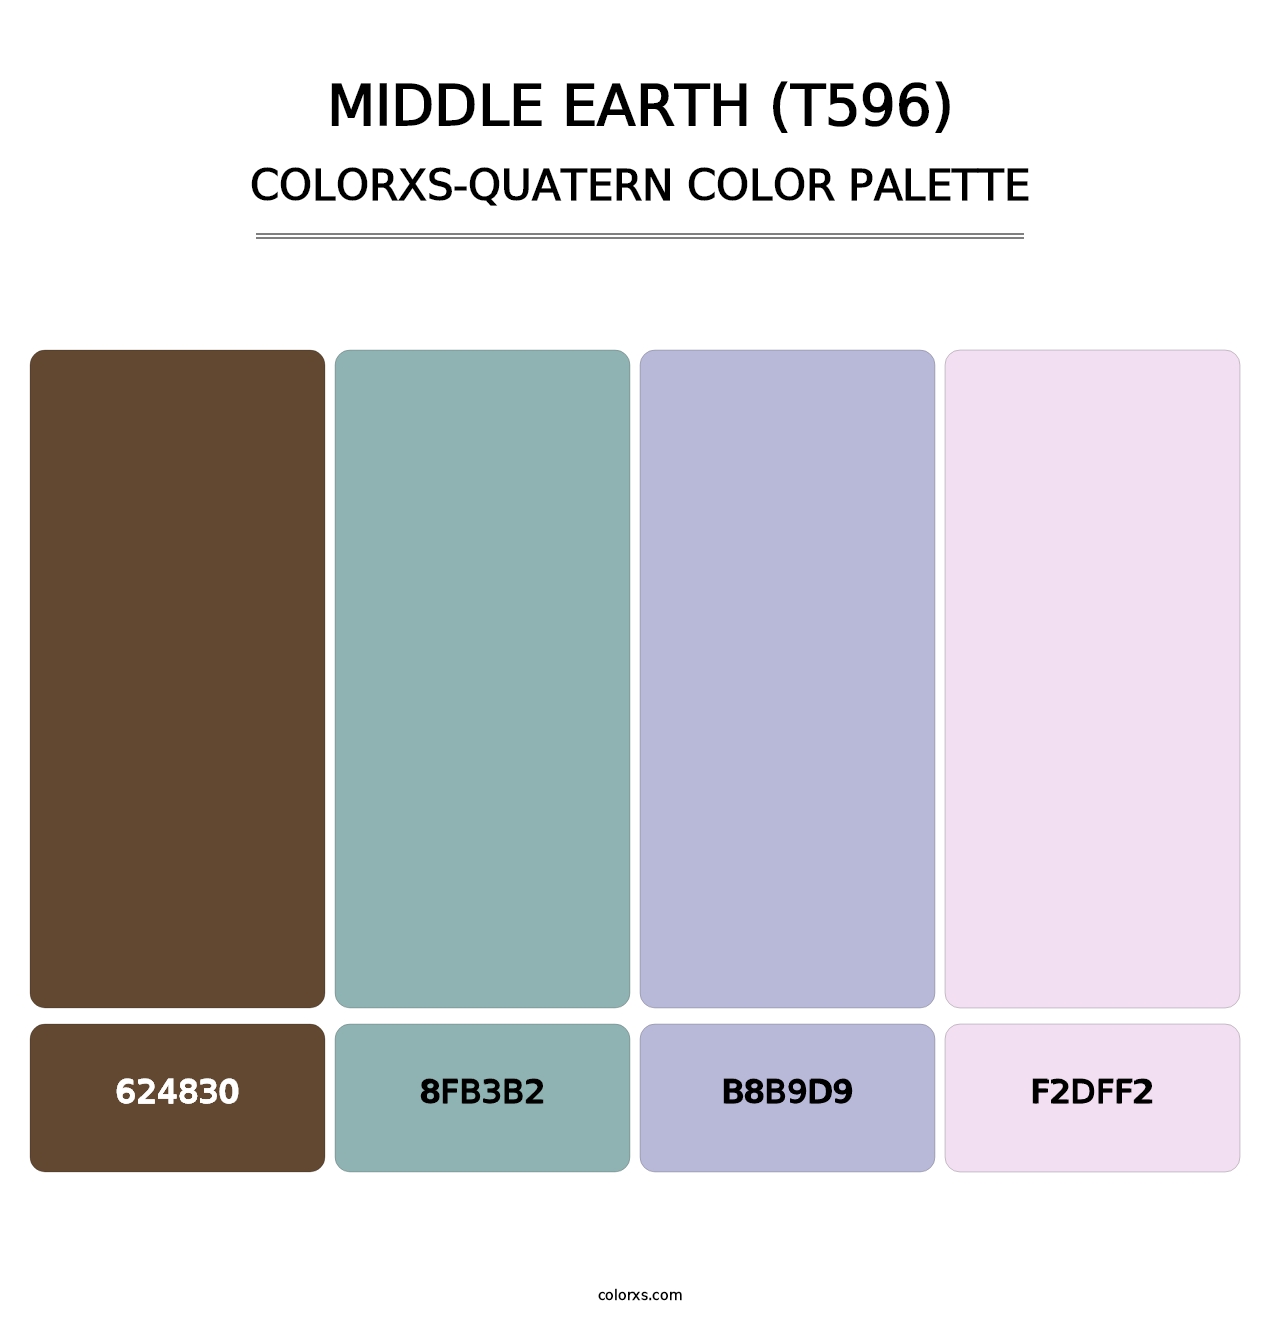 Middle Earth (T596) - Colorxs Quatern Palette